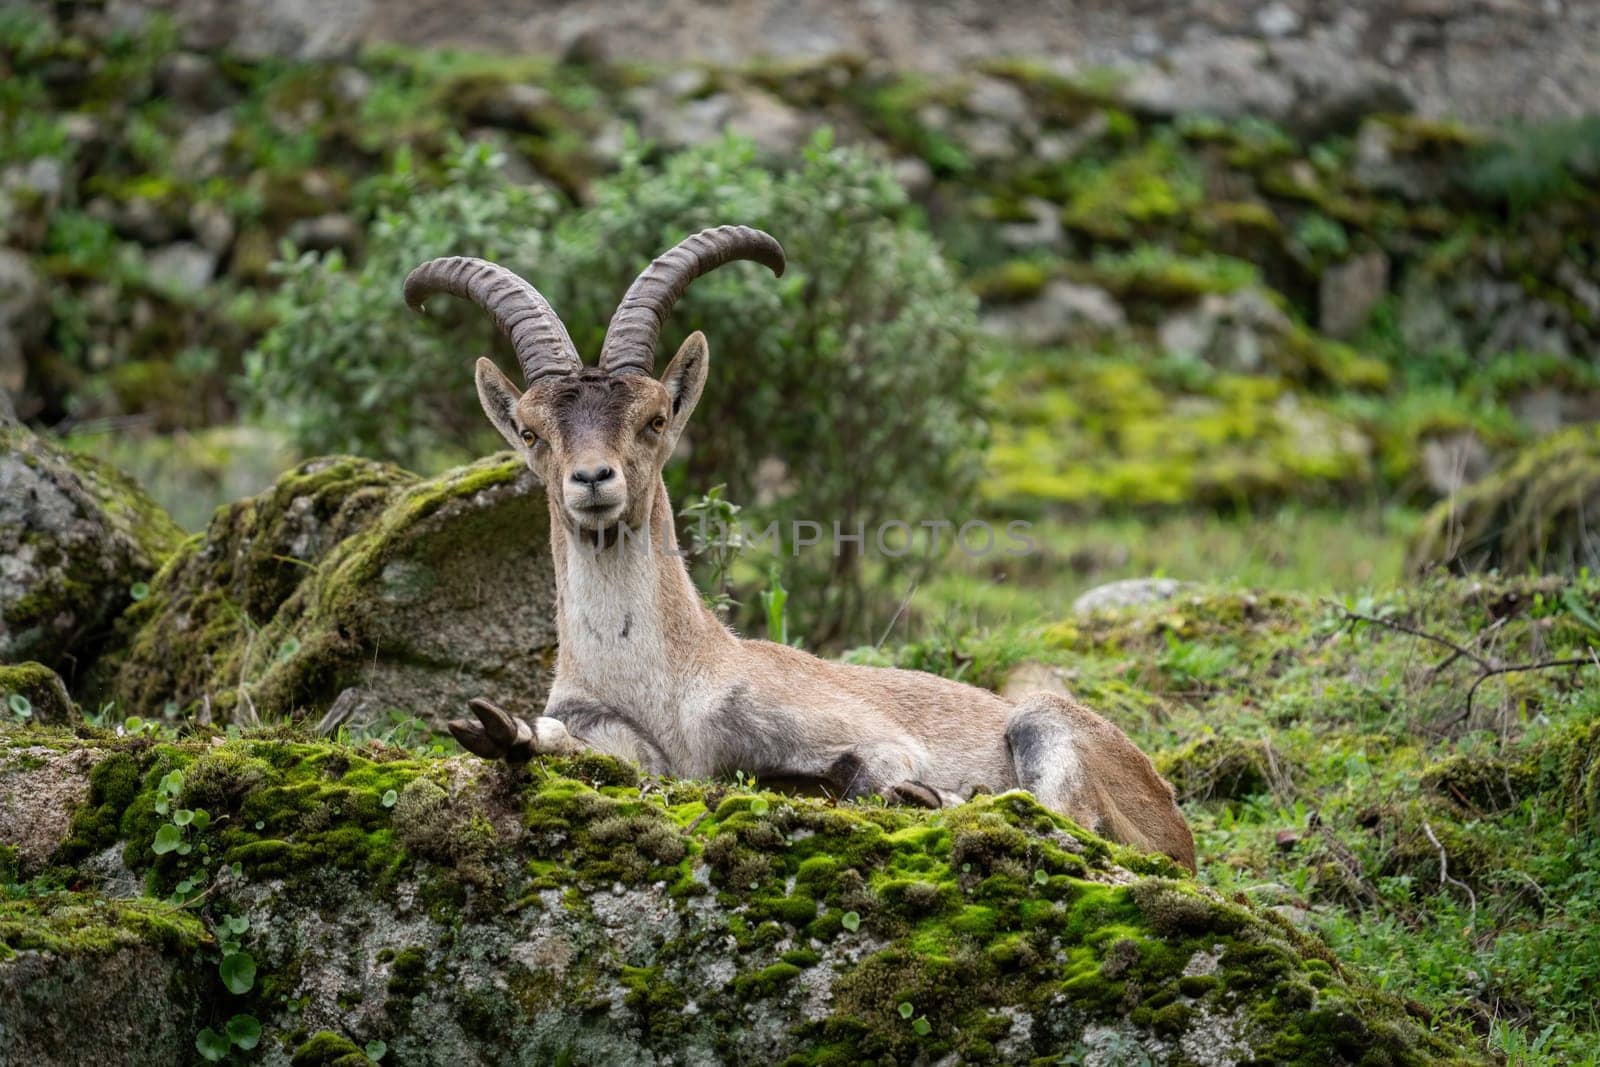 An ibex relaxes on mossy rocks in a tranquil setting.